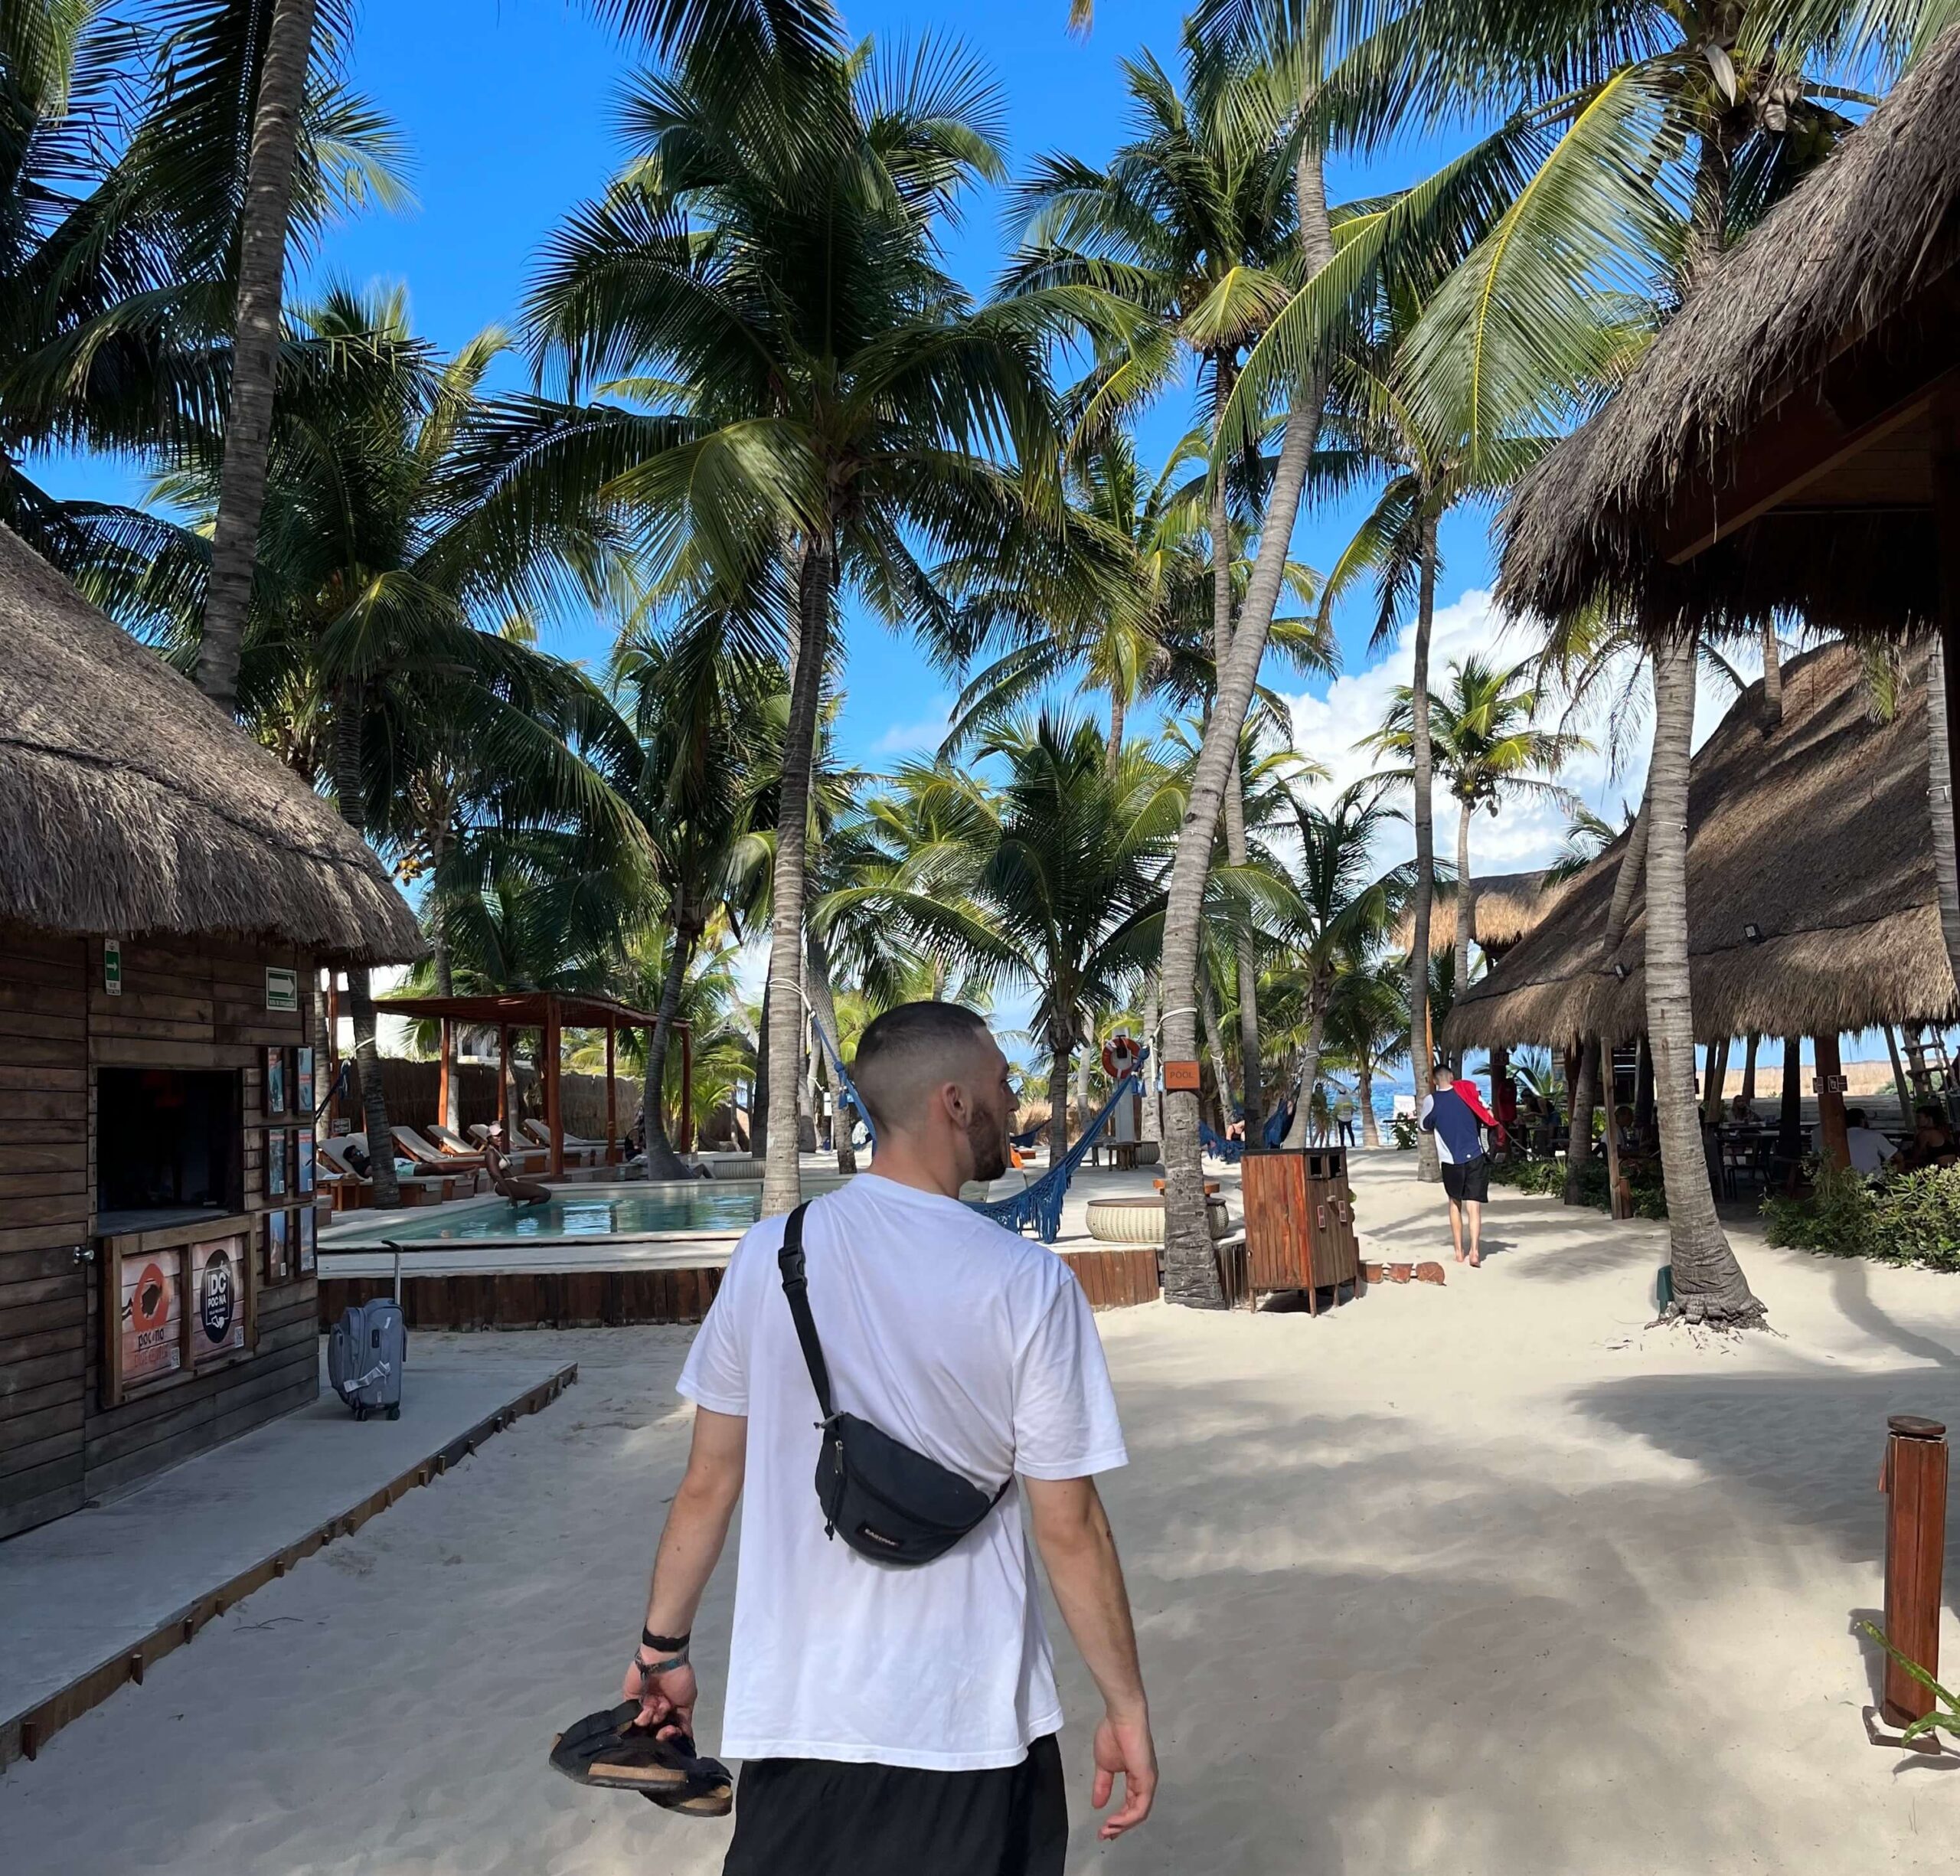 Joe casually strolling through Isla Mujeres, Mexico, with a cross-shoulder fanny pack.